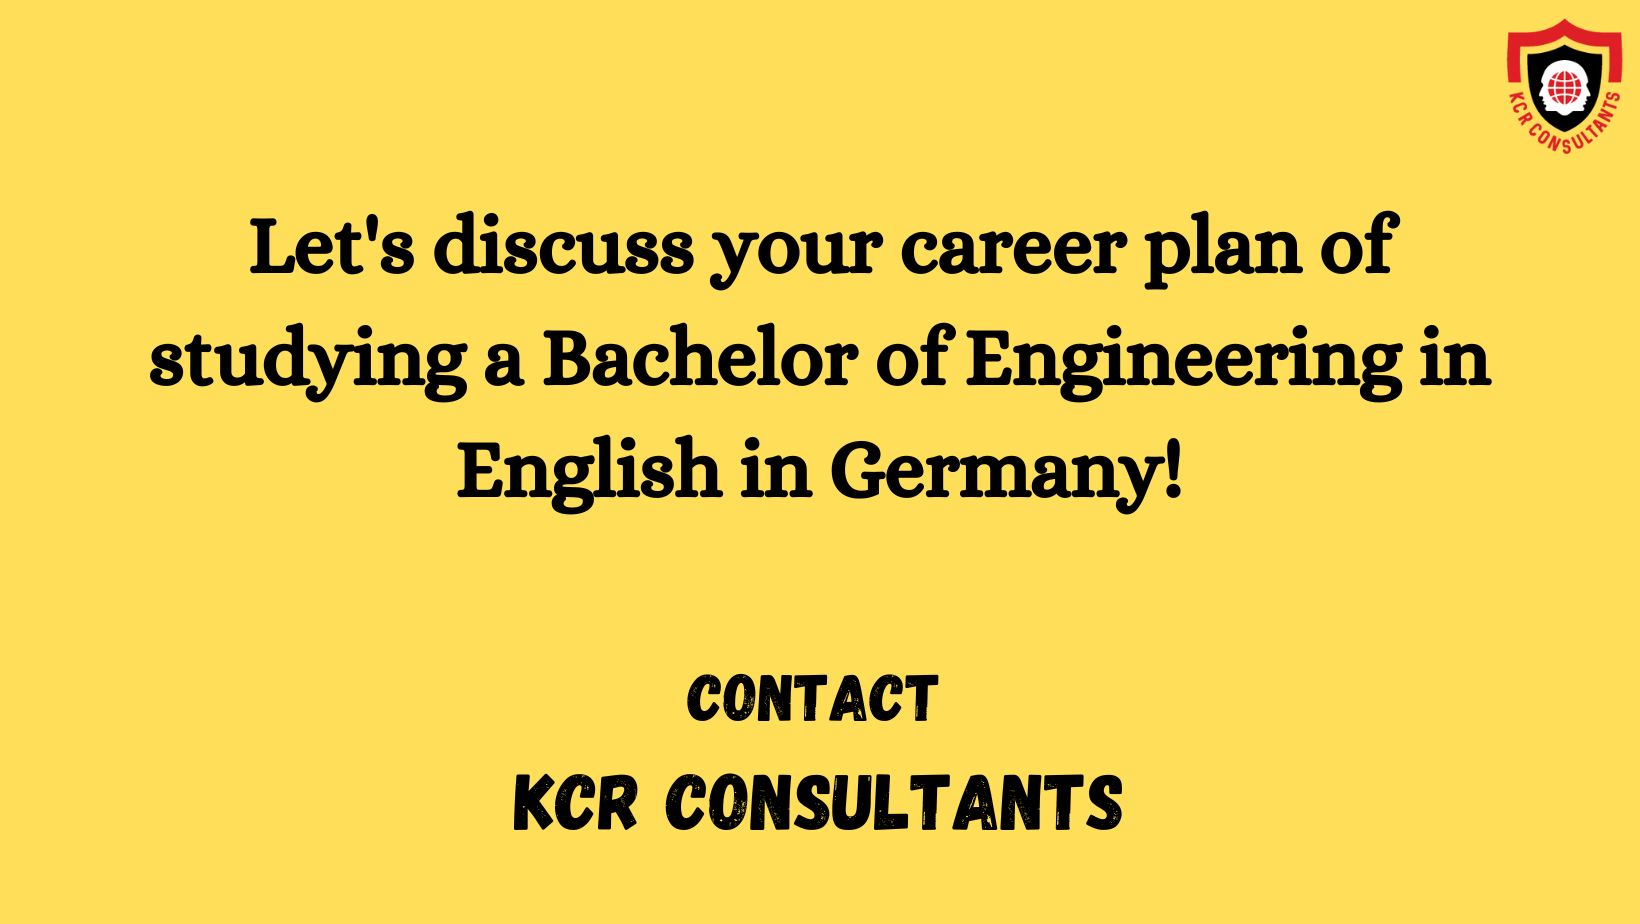 BE in English in Germany - KCR CONSULTANTS - Contact us